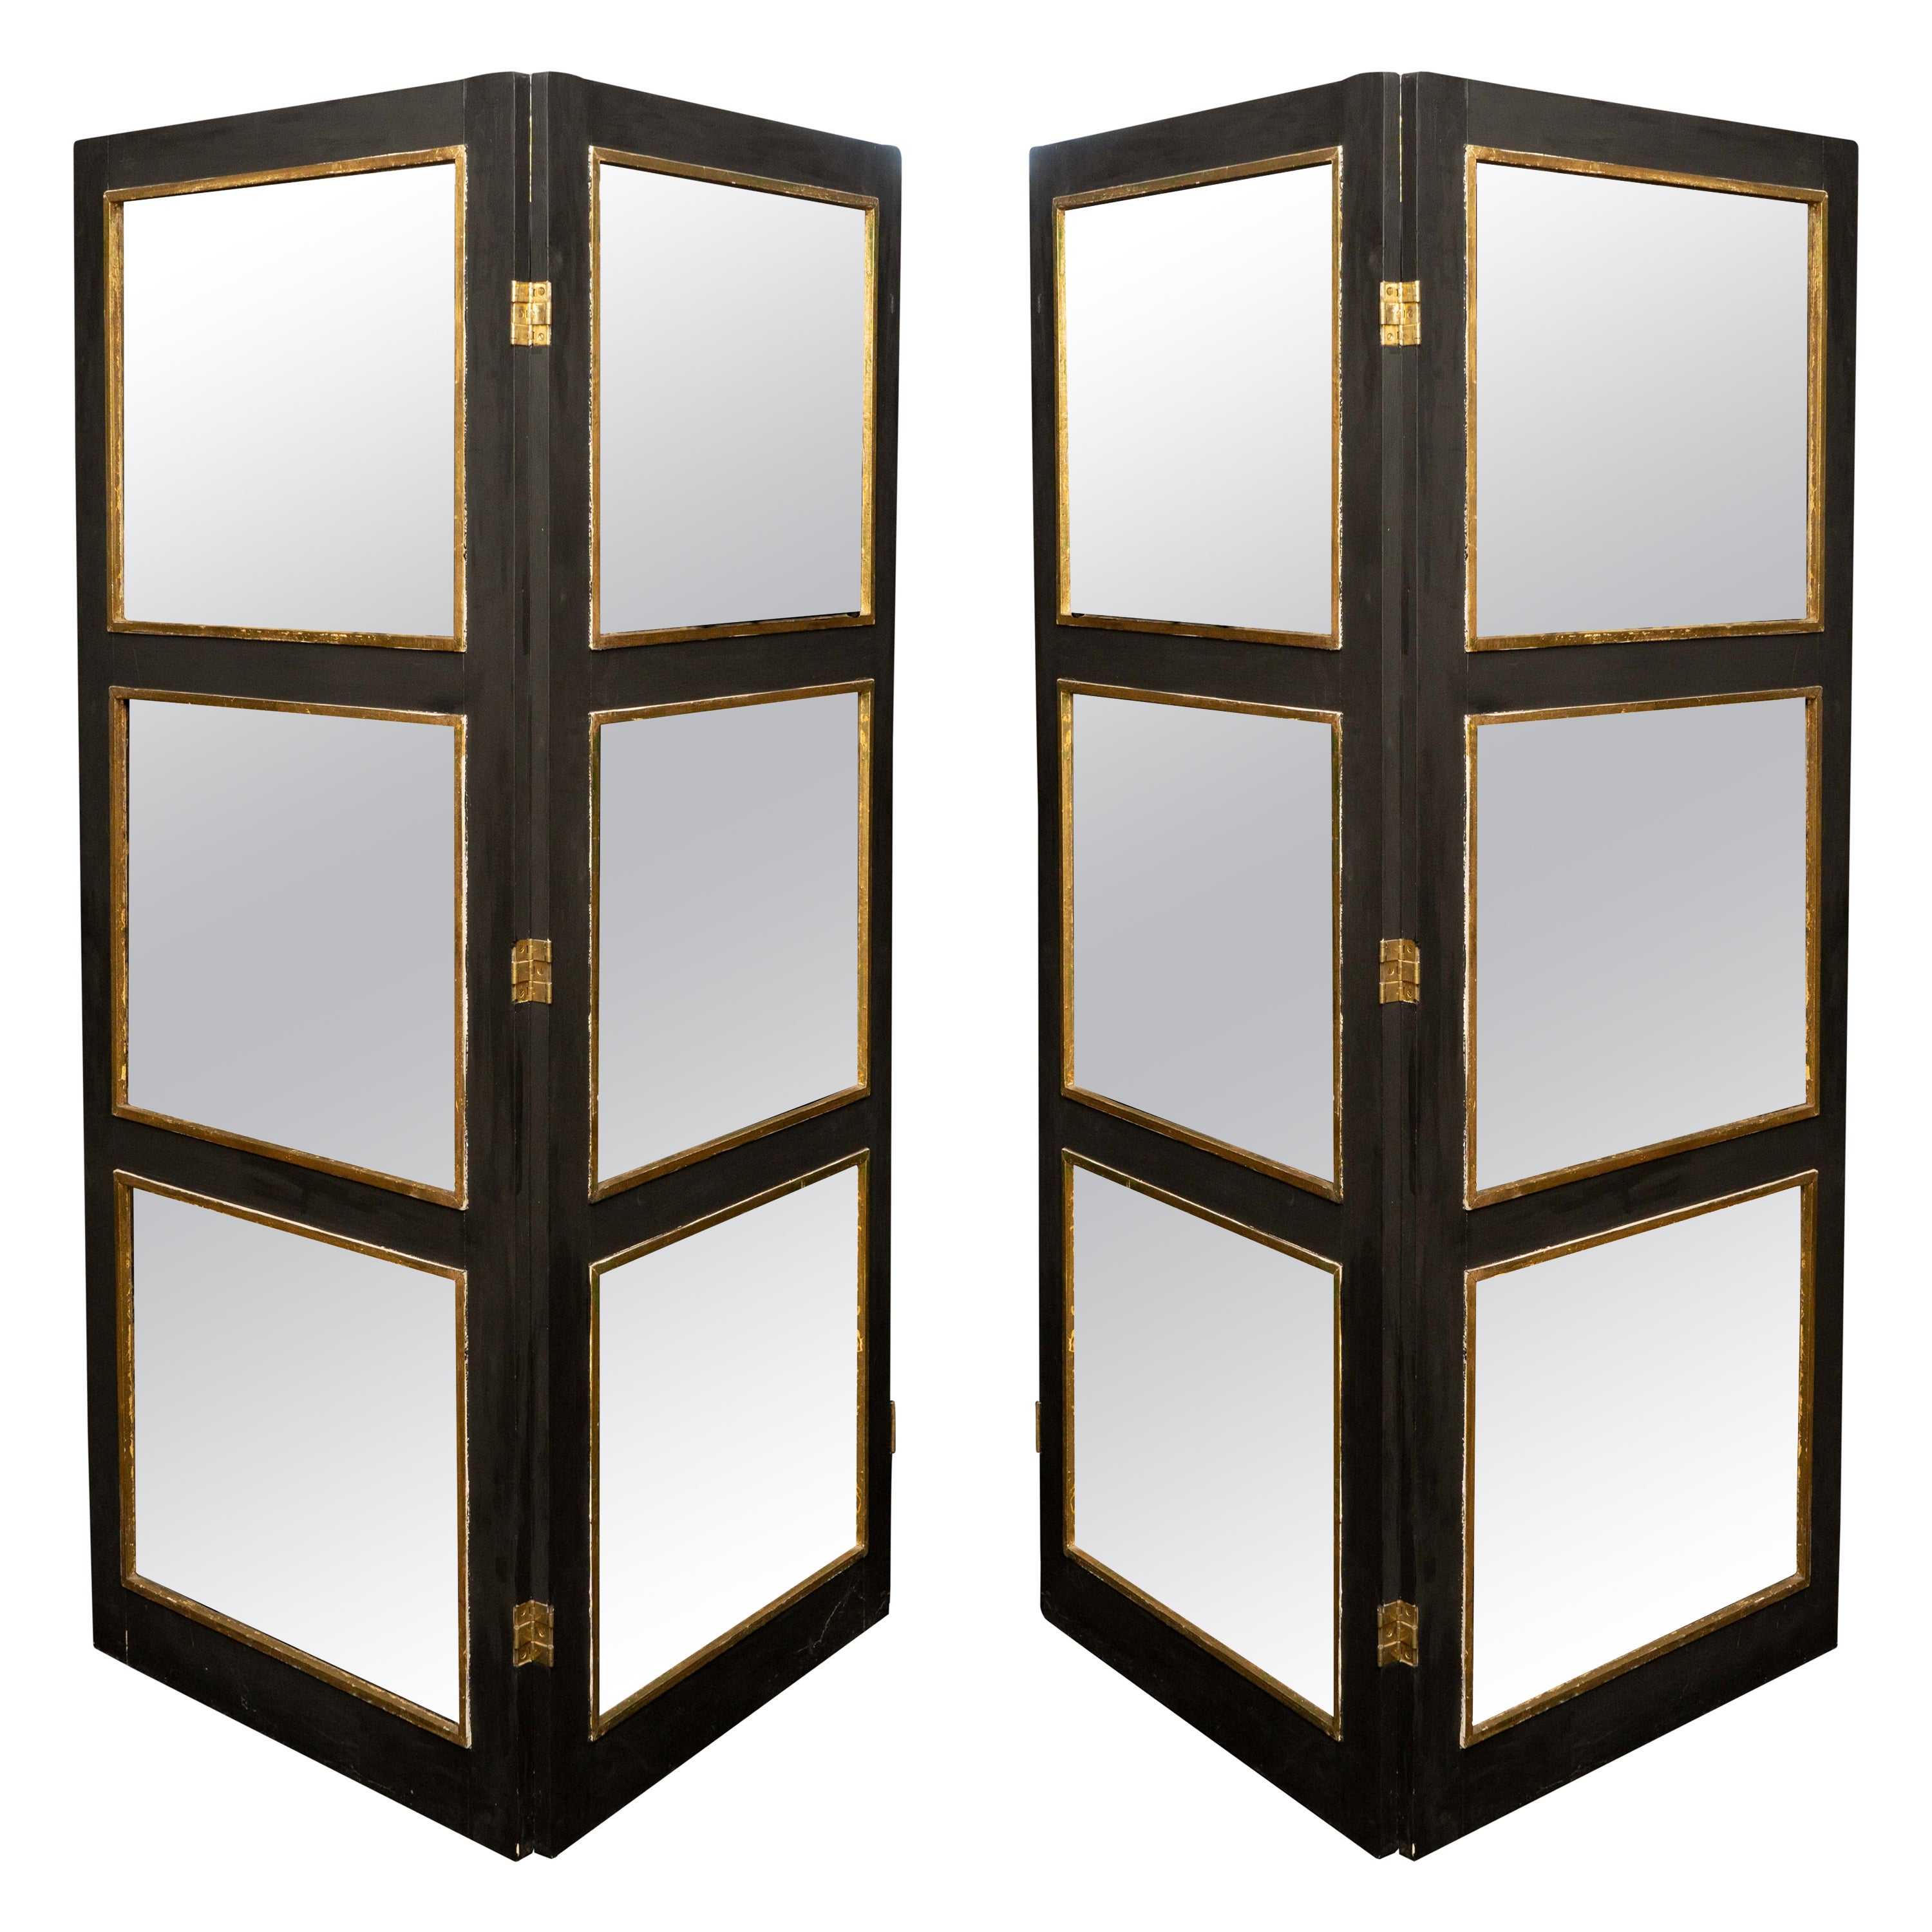 Pair of Large 1940's French Black and Gilt Screens 'Paravent' with Glass Panels